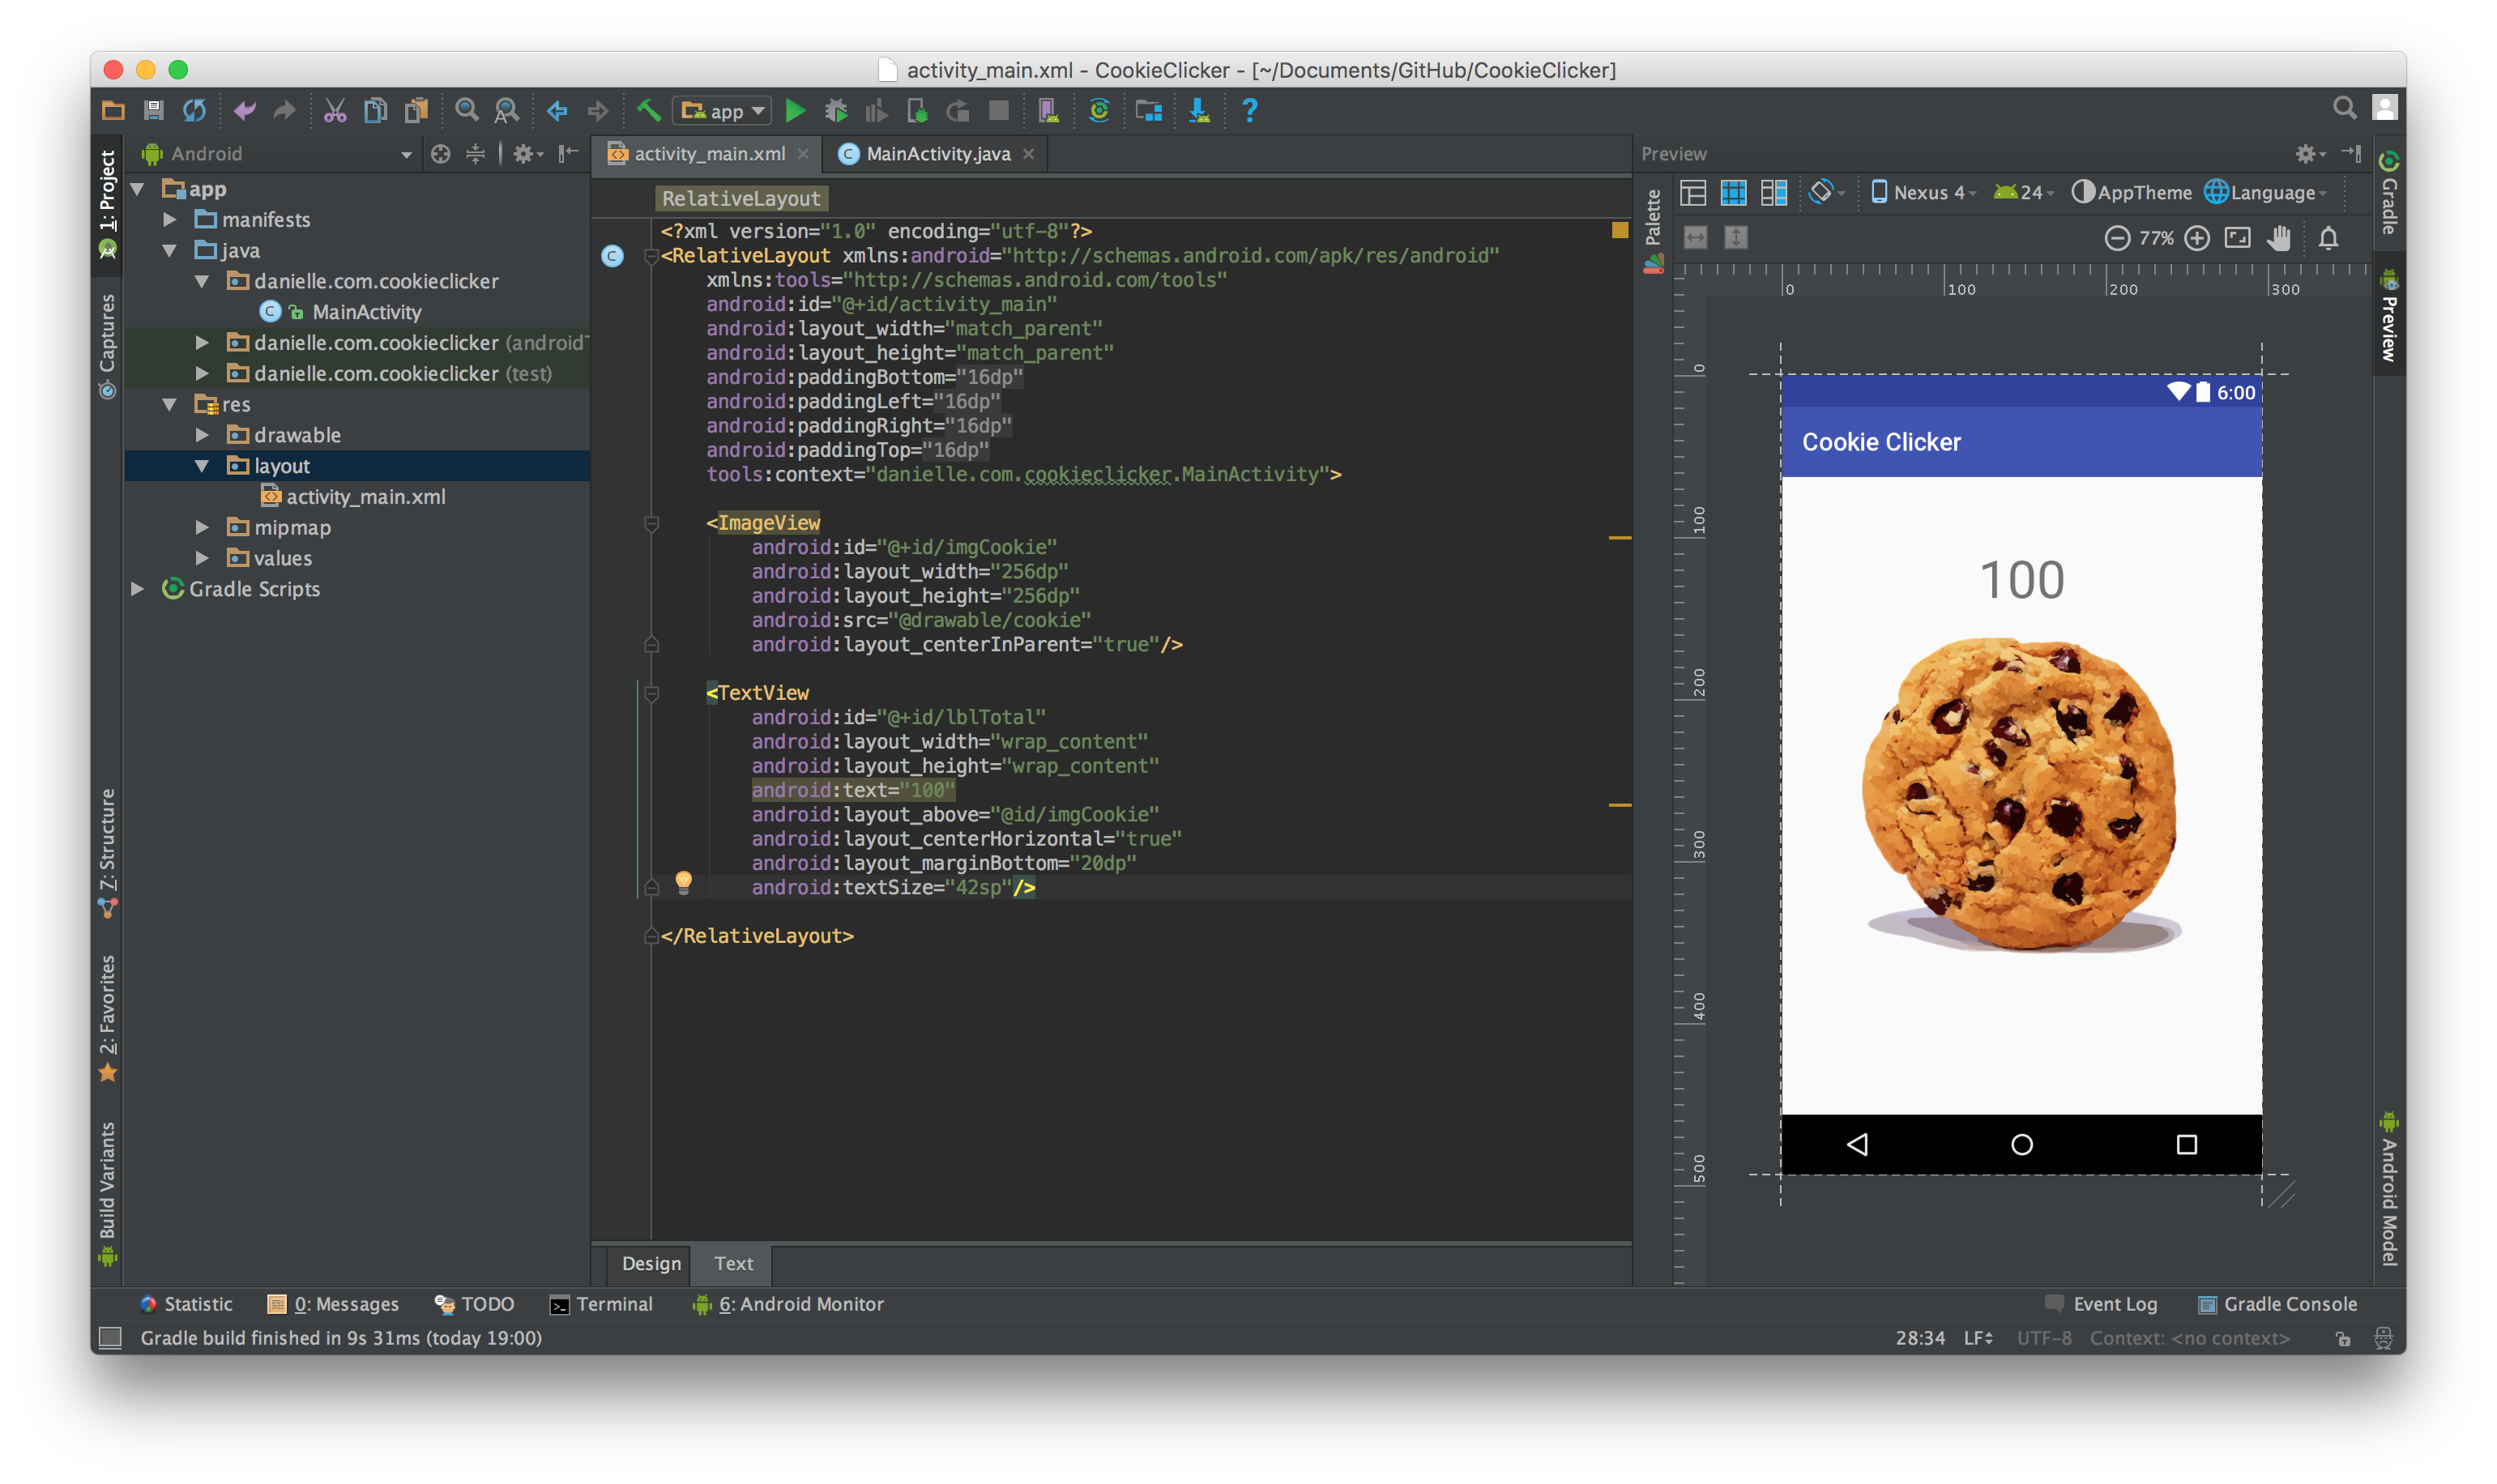 The cookie clicker layout file in Android Studio